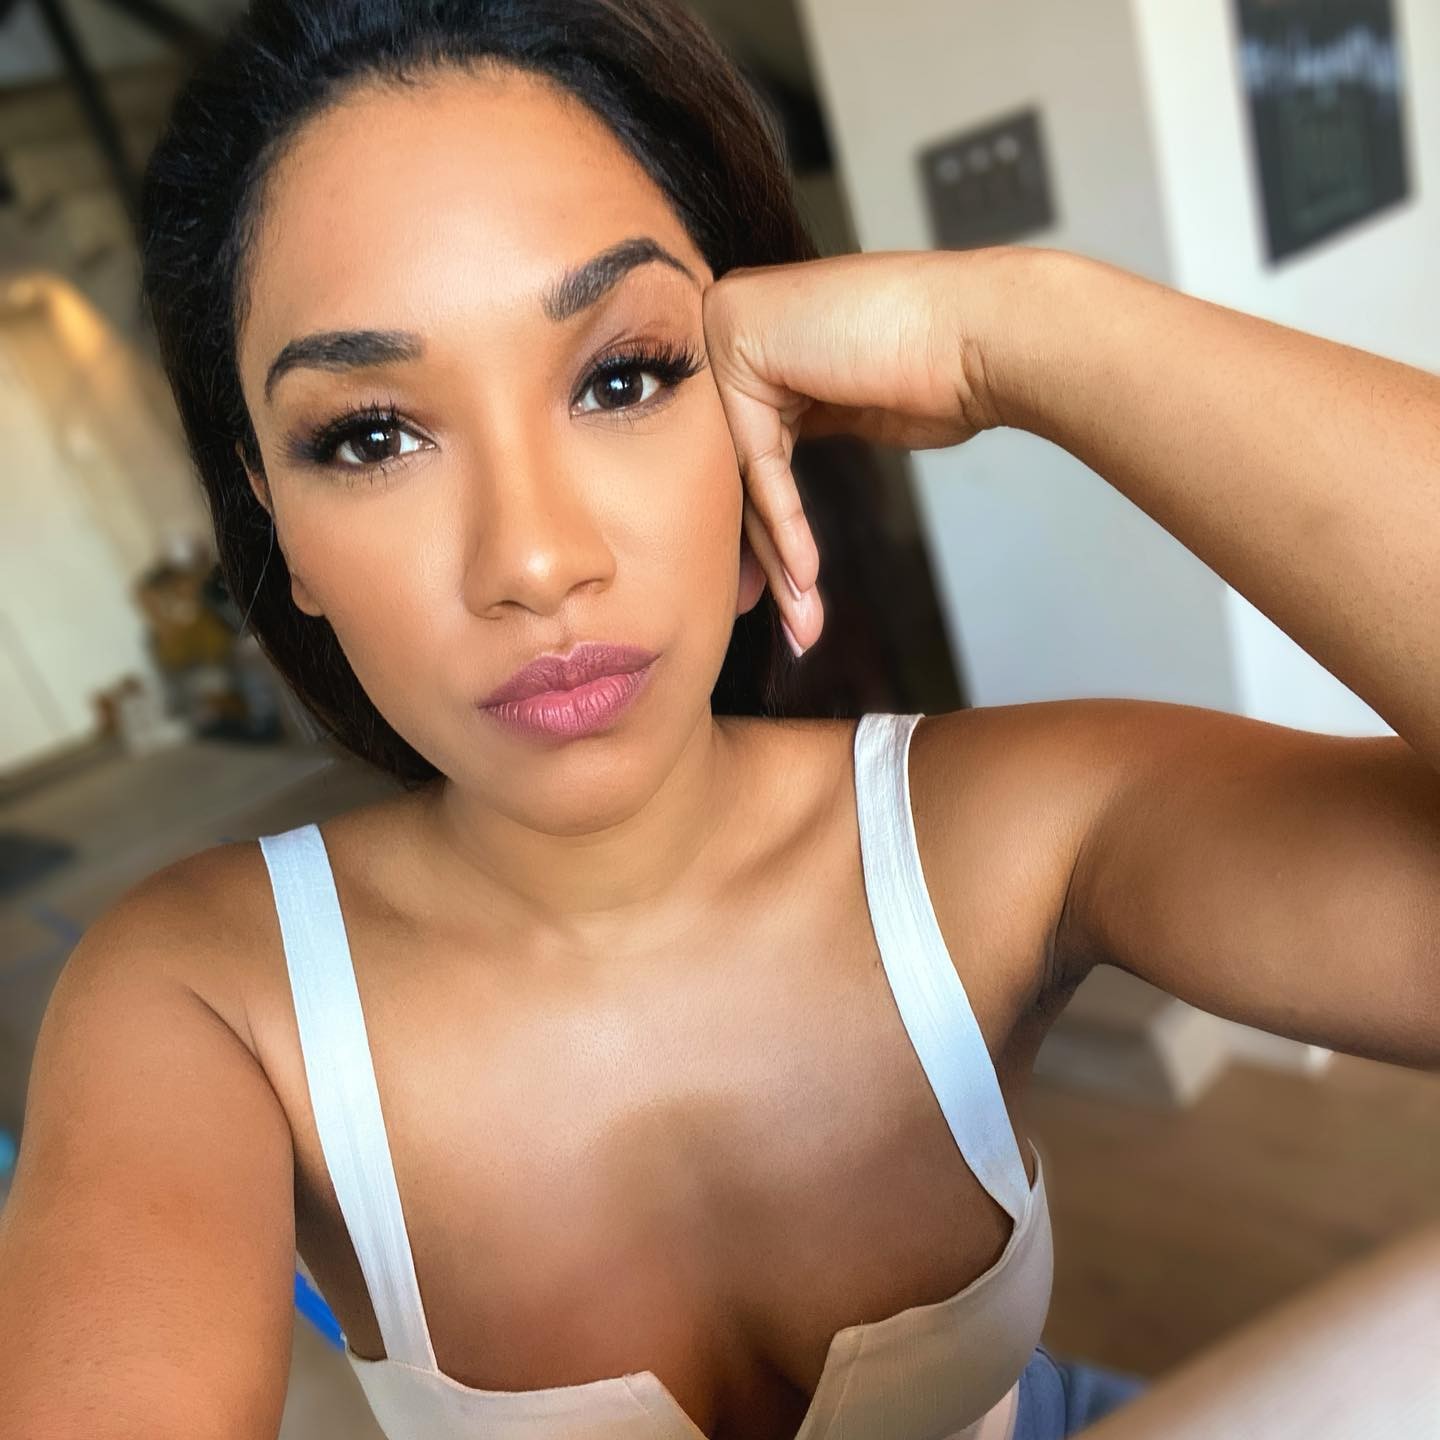 Candice Patton Selfie TheFappening.Pro 5 - Candice Patton Nude Iris West-Allen From “Flash” And “Legends of Tomorrow” (74 Photos)